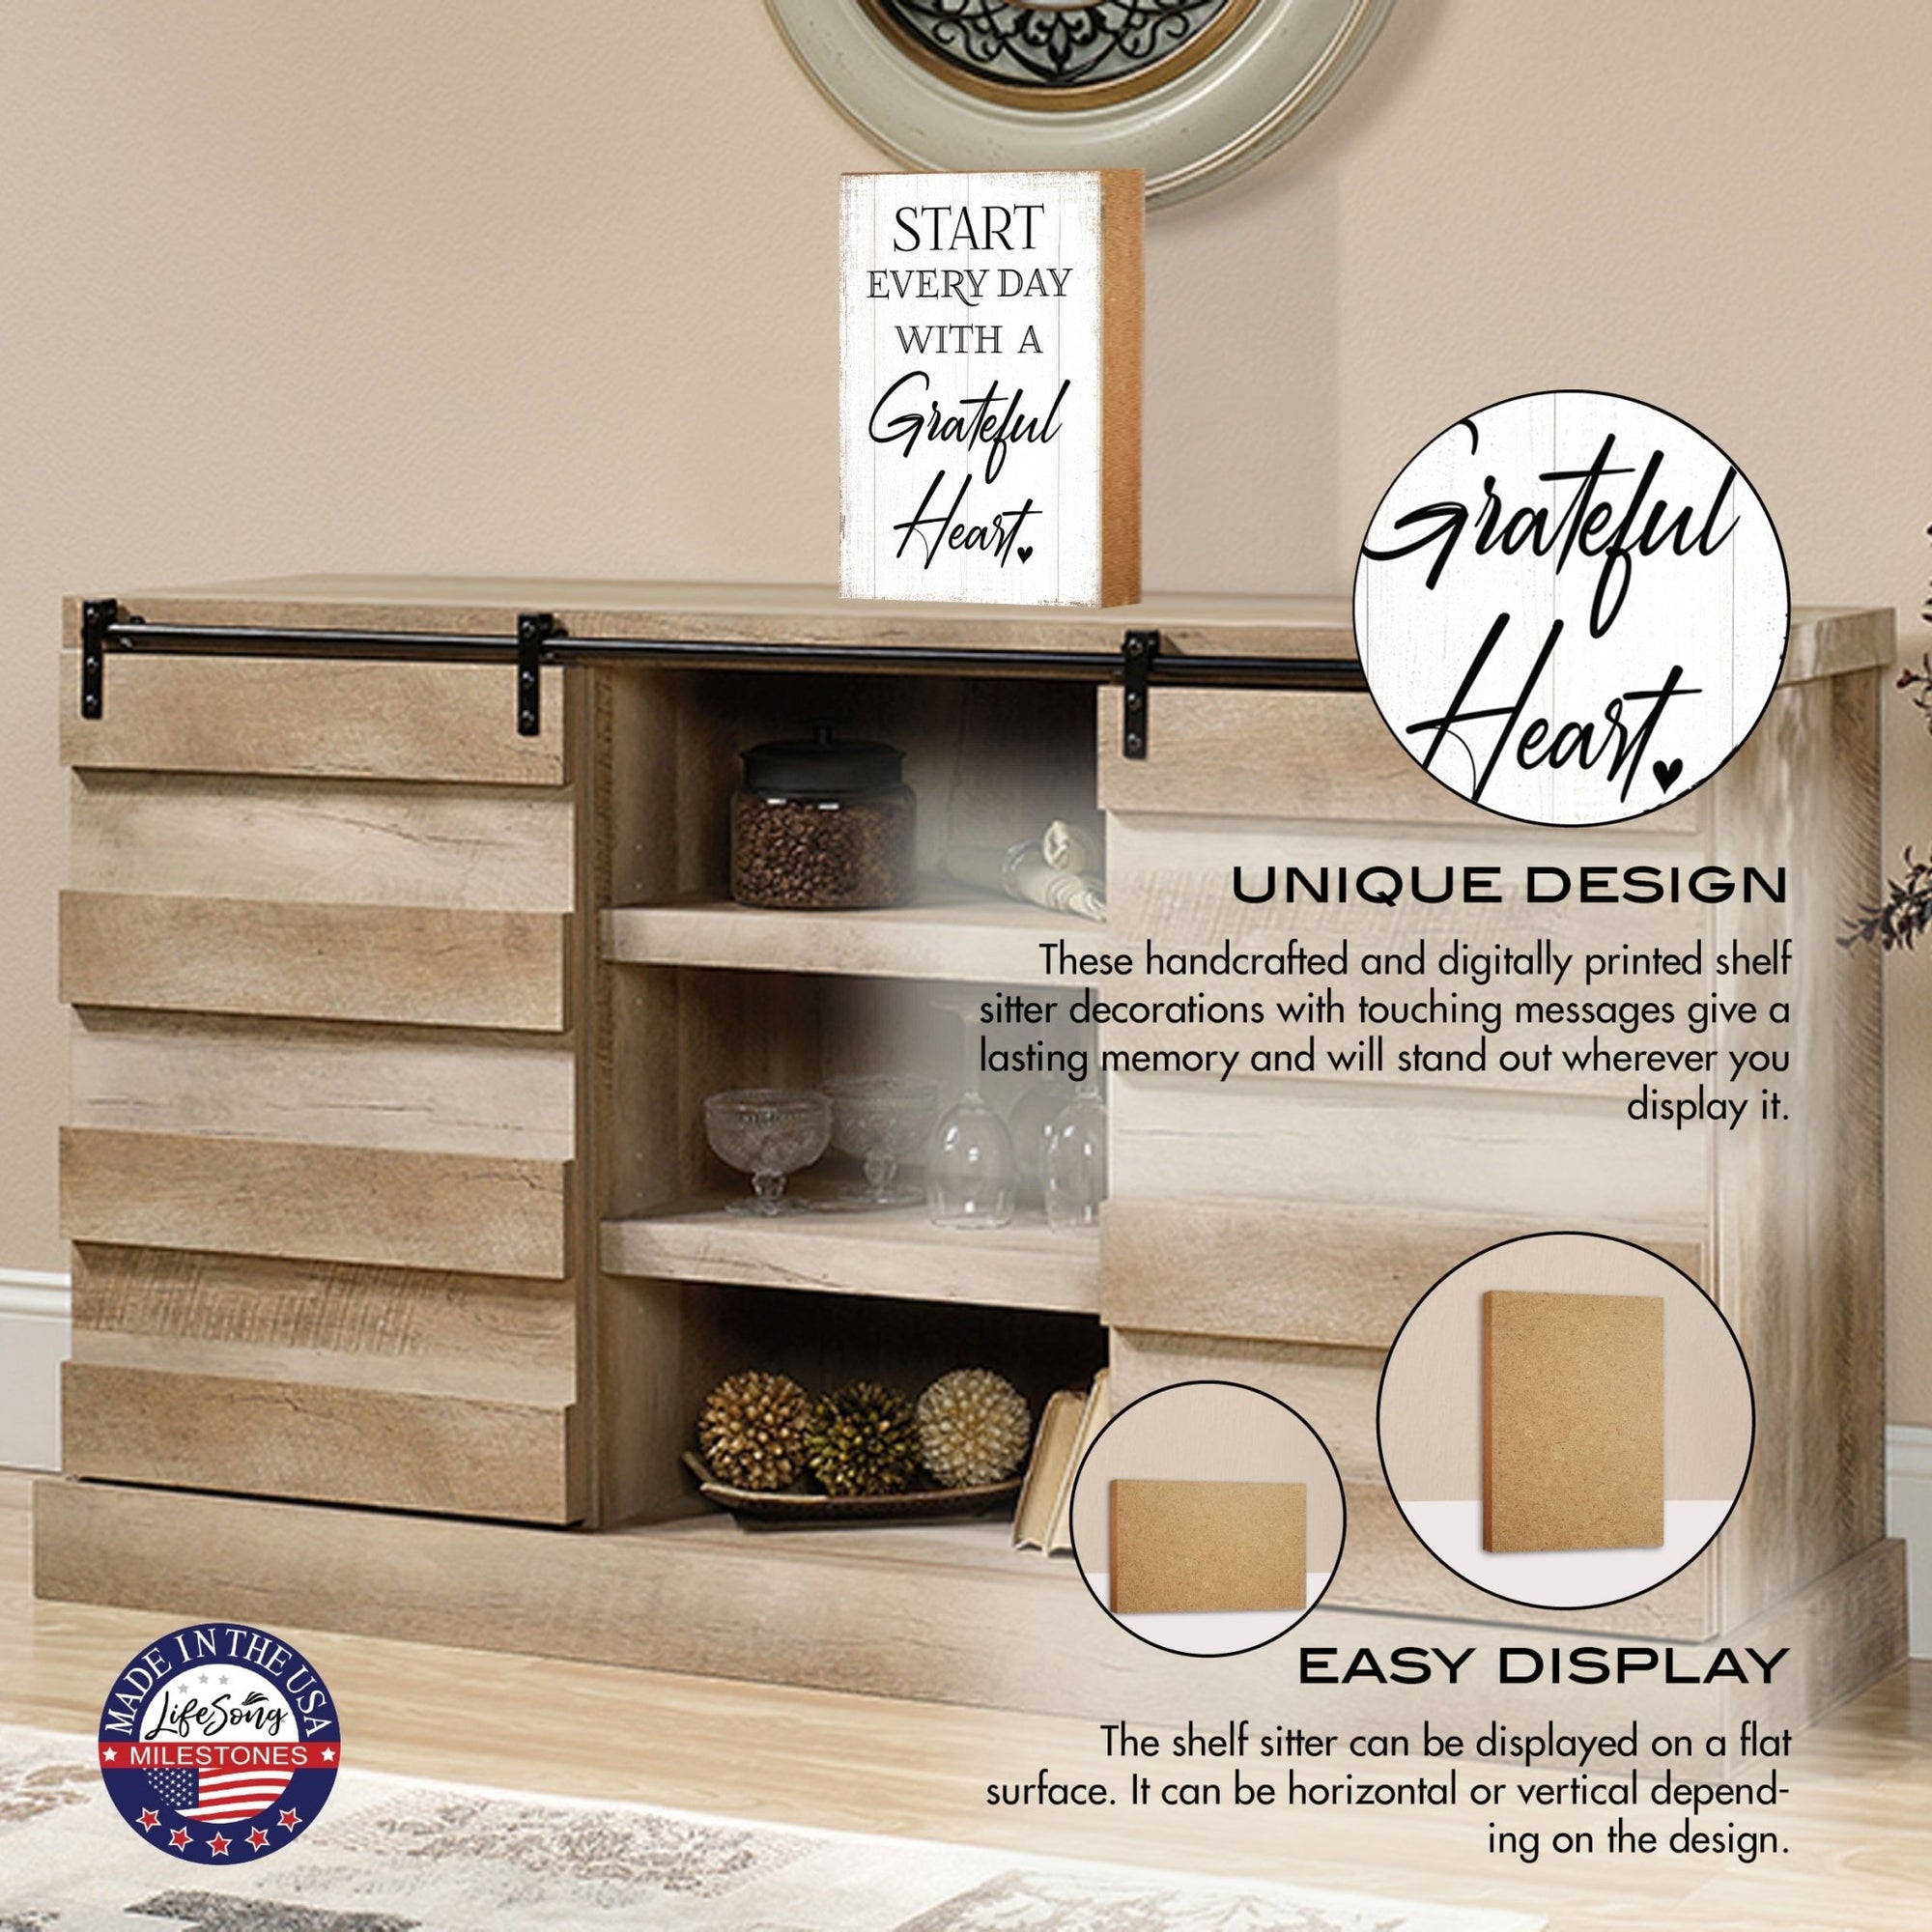 Elegant Motivational Wood Desk & Shelf Décor Gift ideas - Start Every Day With A Grateful Heart - LifeSong Milestones